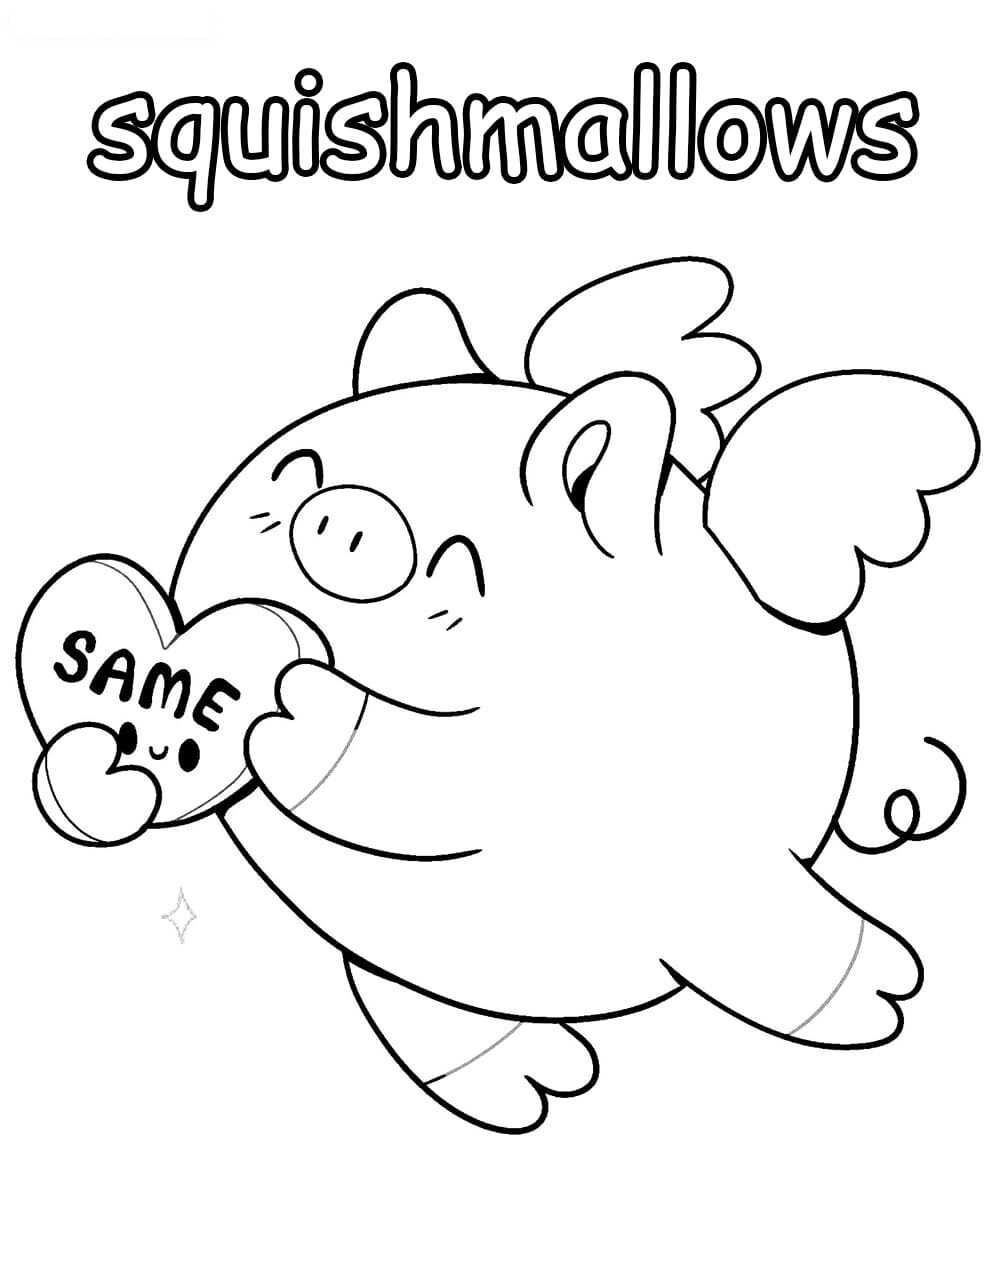 Squishmallow Willow the Pegasus flies to the sky Coloring Pages